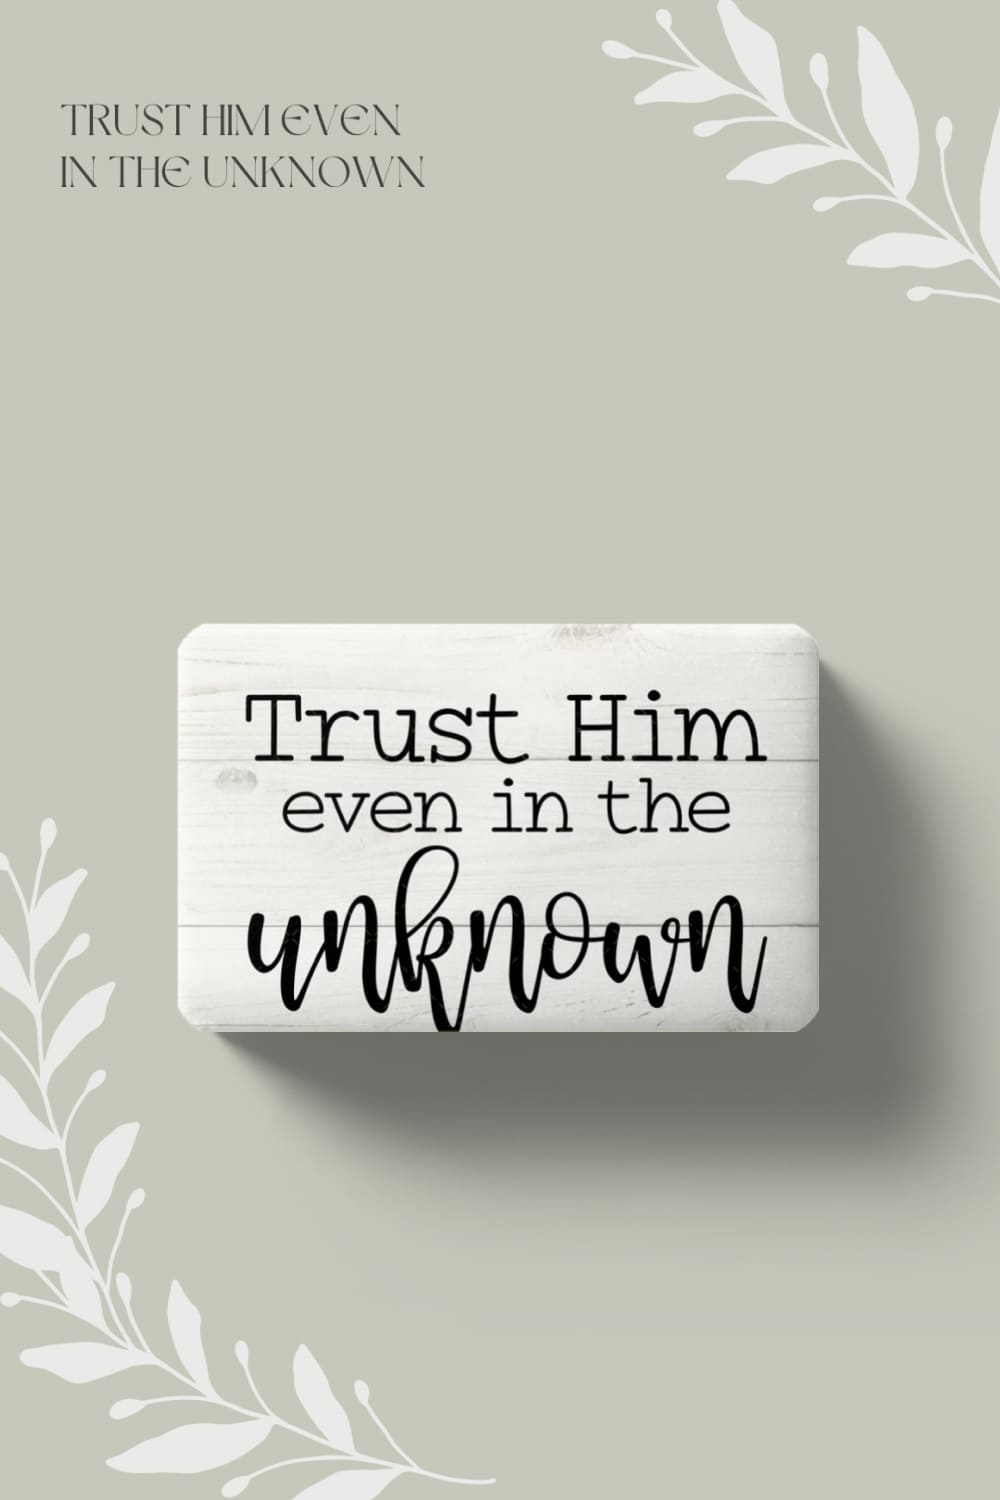 An inscription about trust in God is written on a white wooden object.